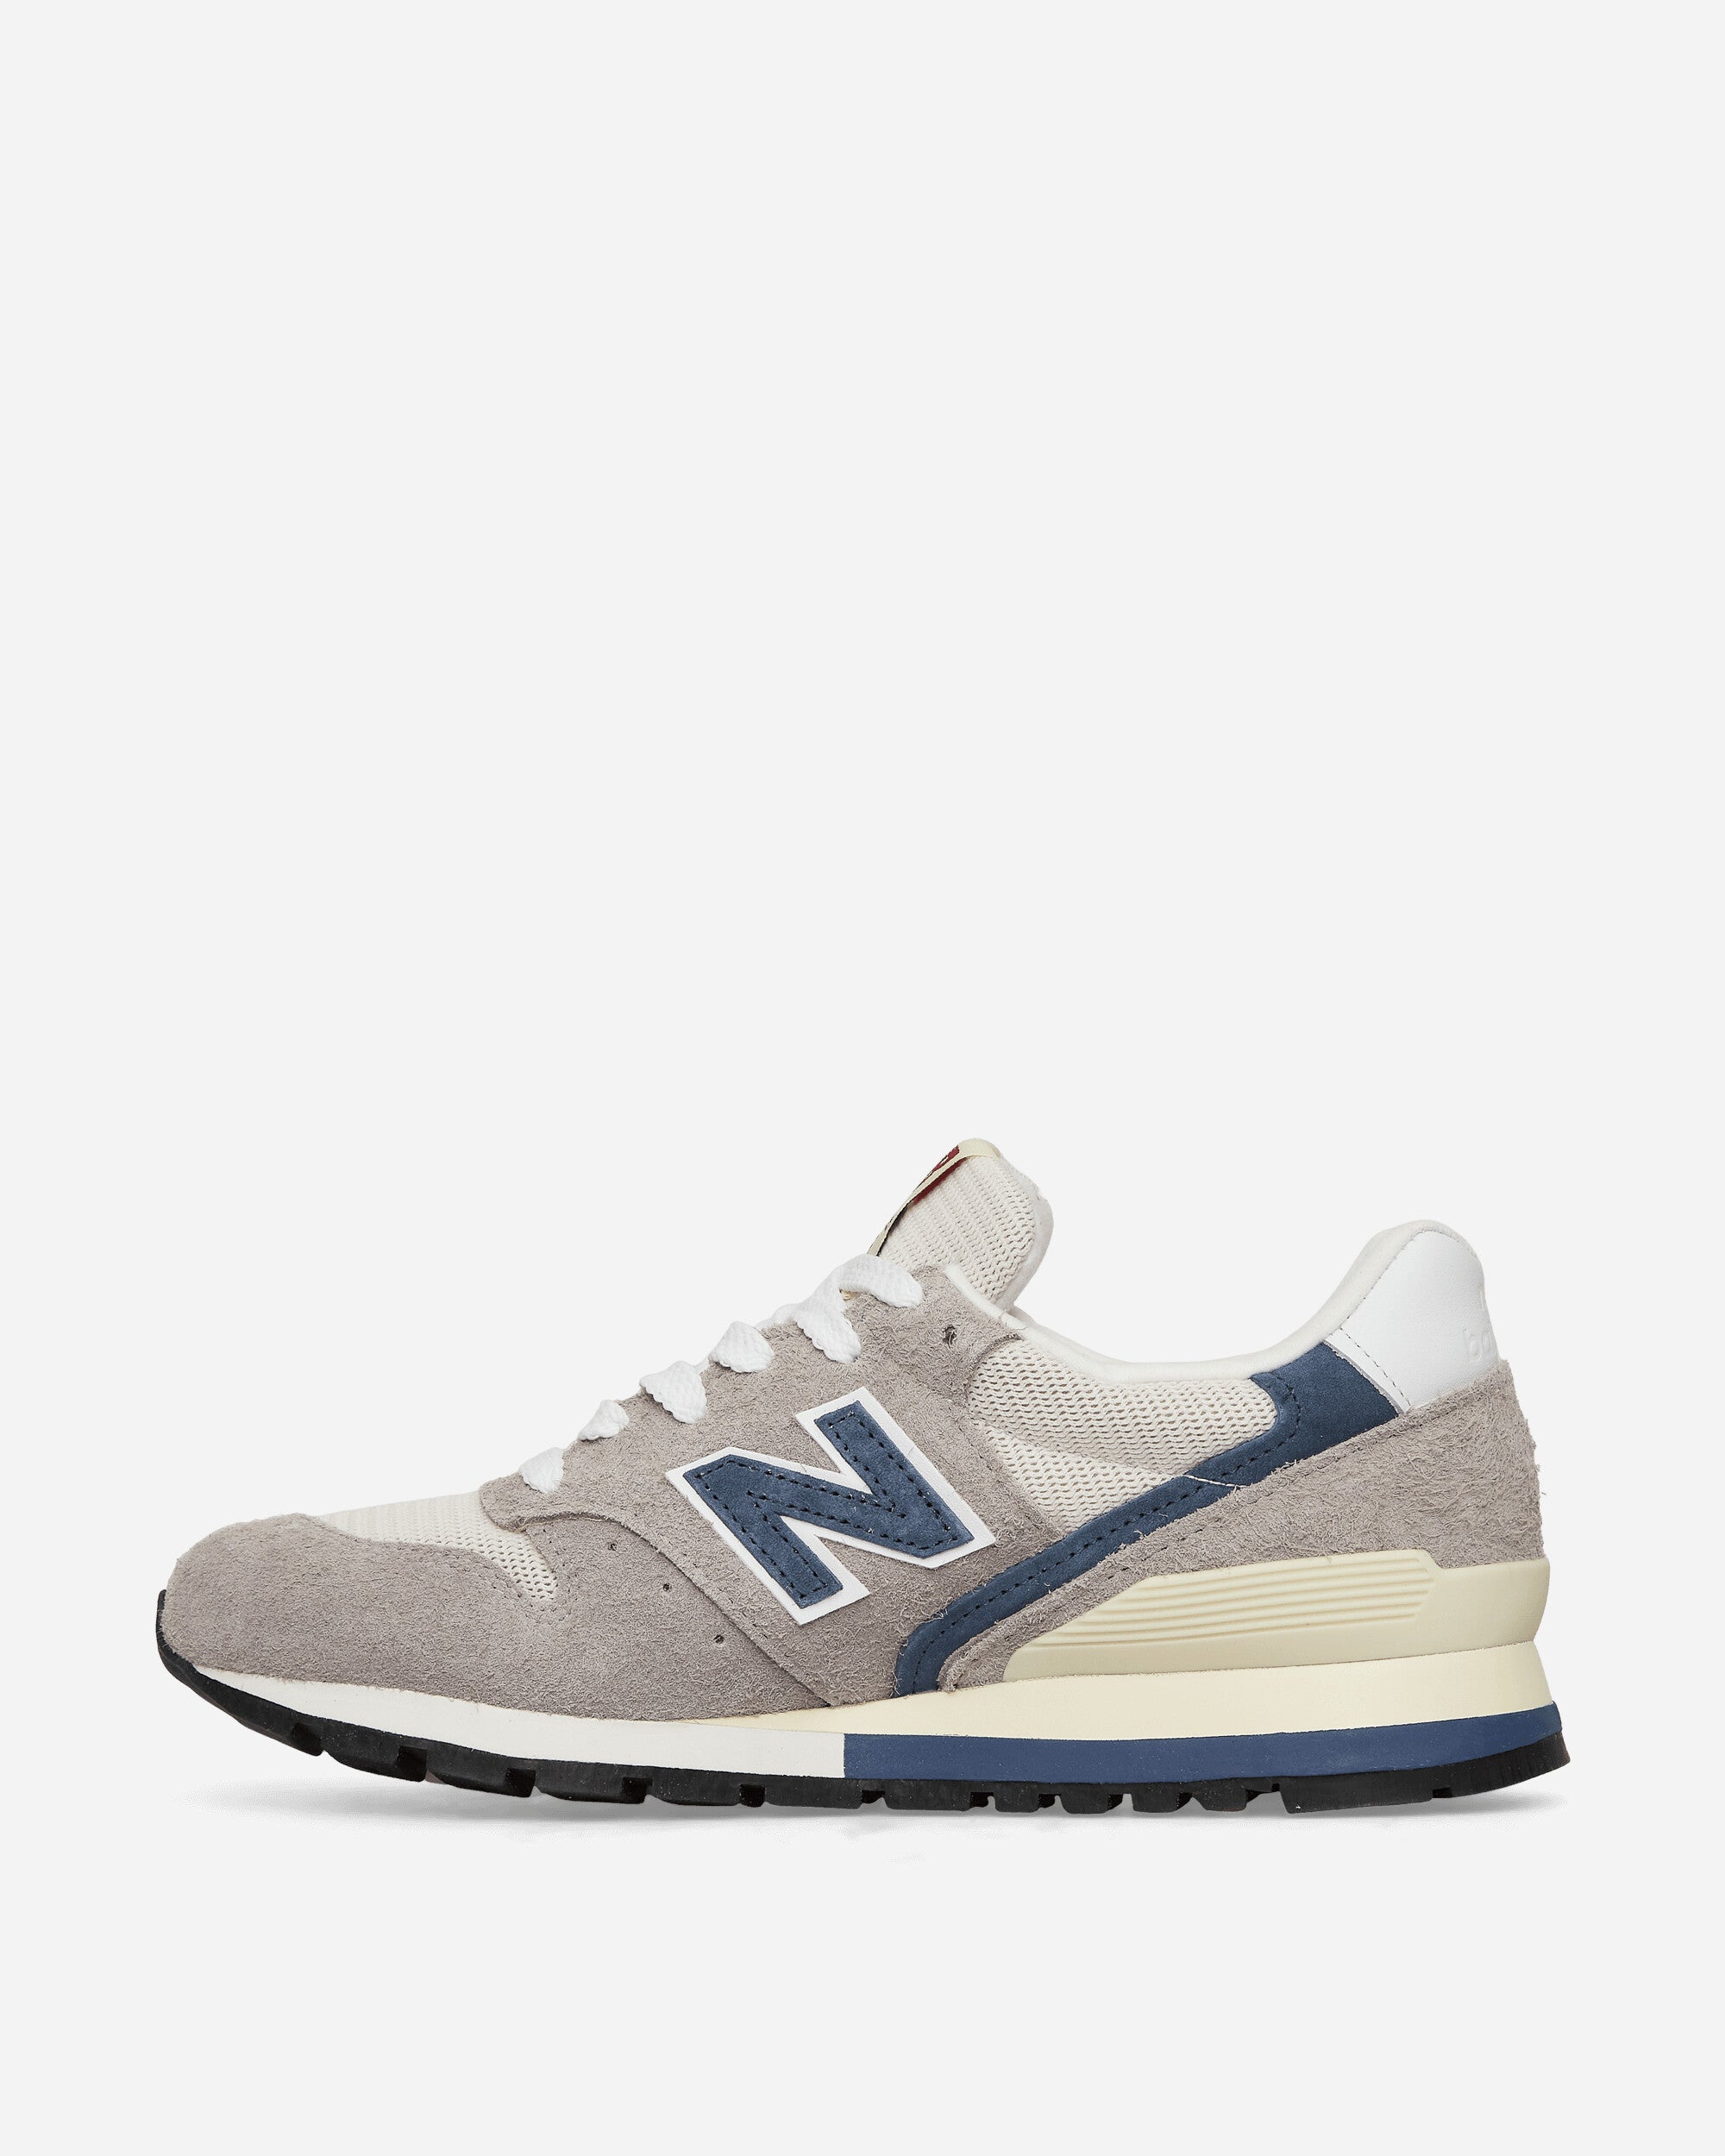 Glimmend Potentieel Rouwen New Balance Made in USA 996 Sneakers Grey - Slam Jam Official Store